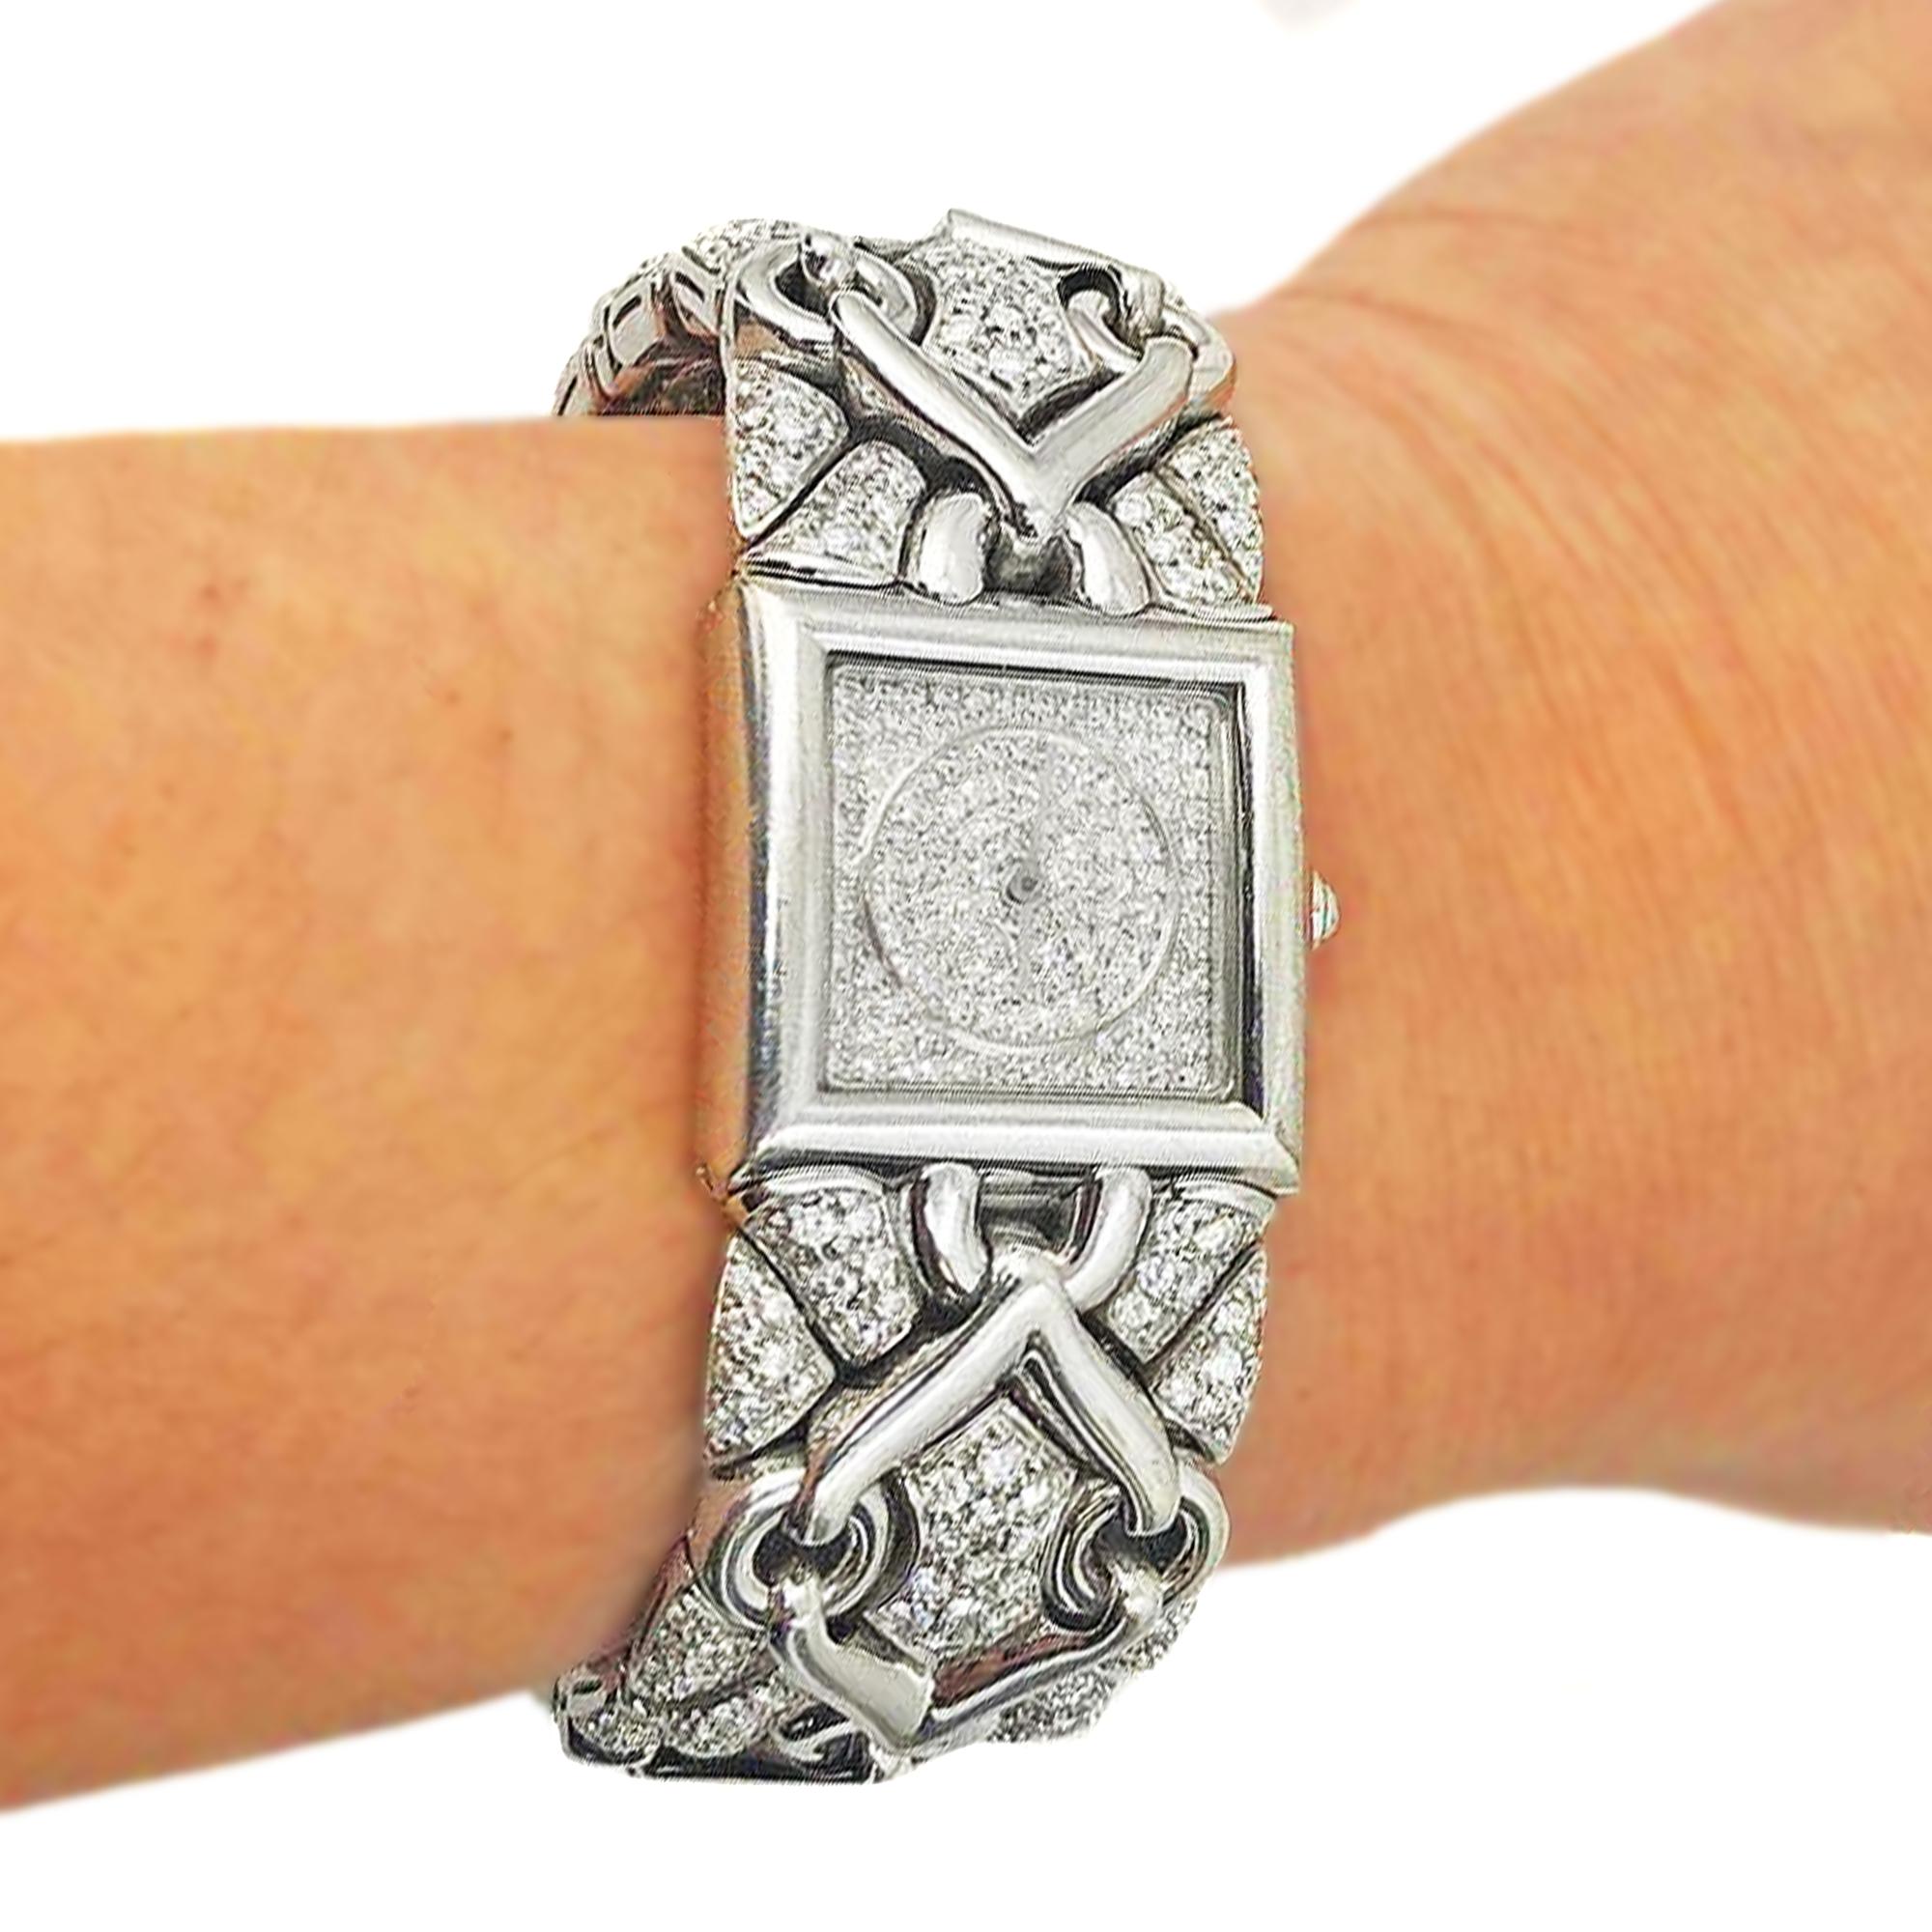 BVLGARI Trika 21mm 18K White Gold and All Diamond Watch

This incredible Bulgari ladies wrist watch is crafted with 18k white gold The watch band is designed with a unique, intricate pattern along with pavé set round-cut diamonds. The dial is a